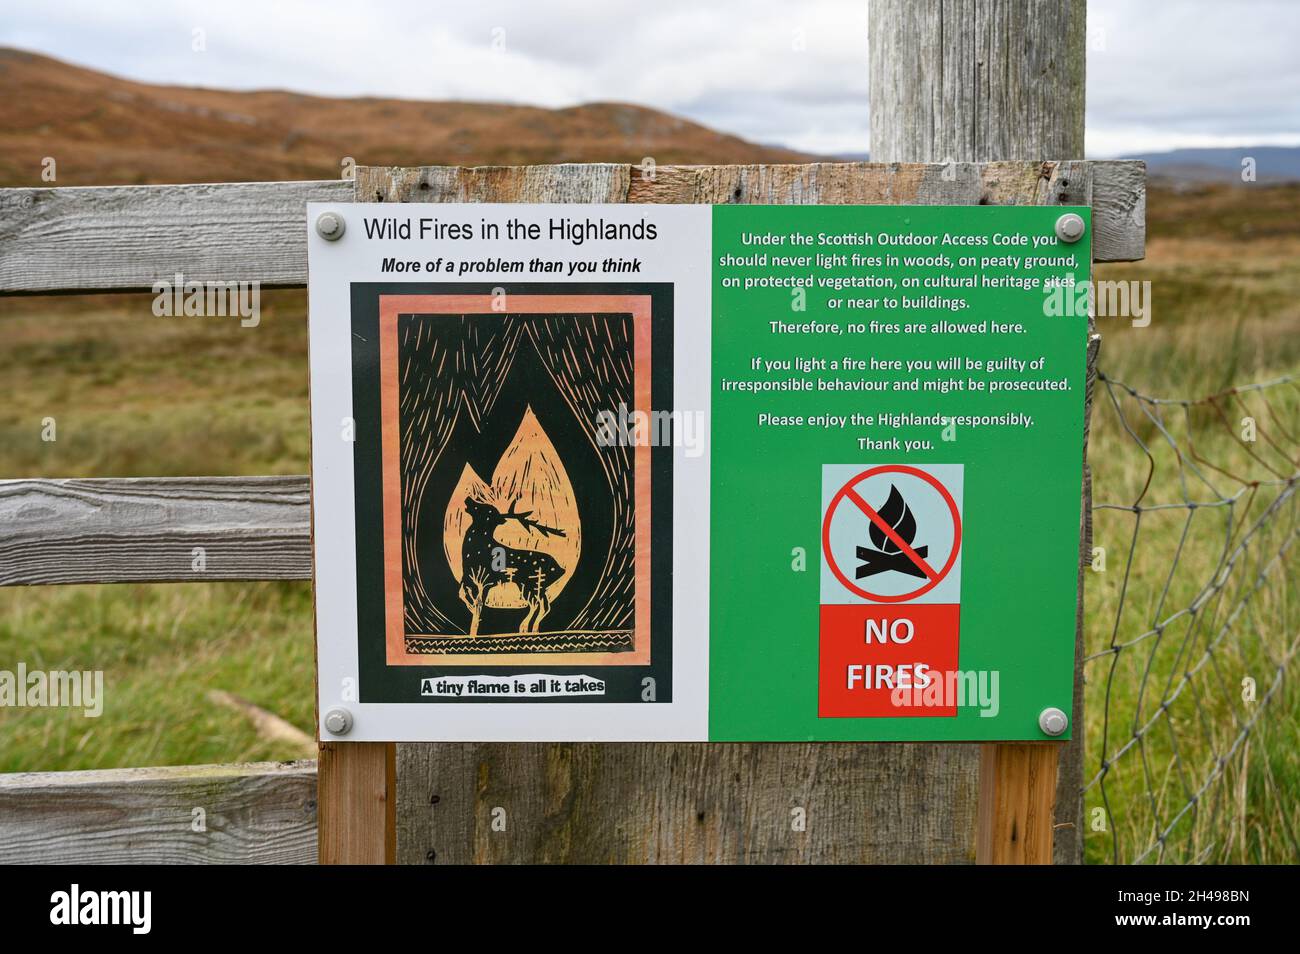 Sign warning against wild fires in the Scottish Highlands and stating that no fires are allowed here. On wooden gate with blurred moorland background. Stock Photo